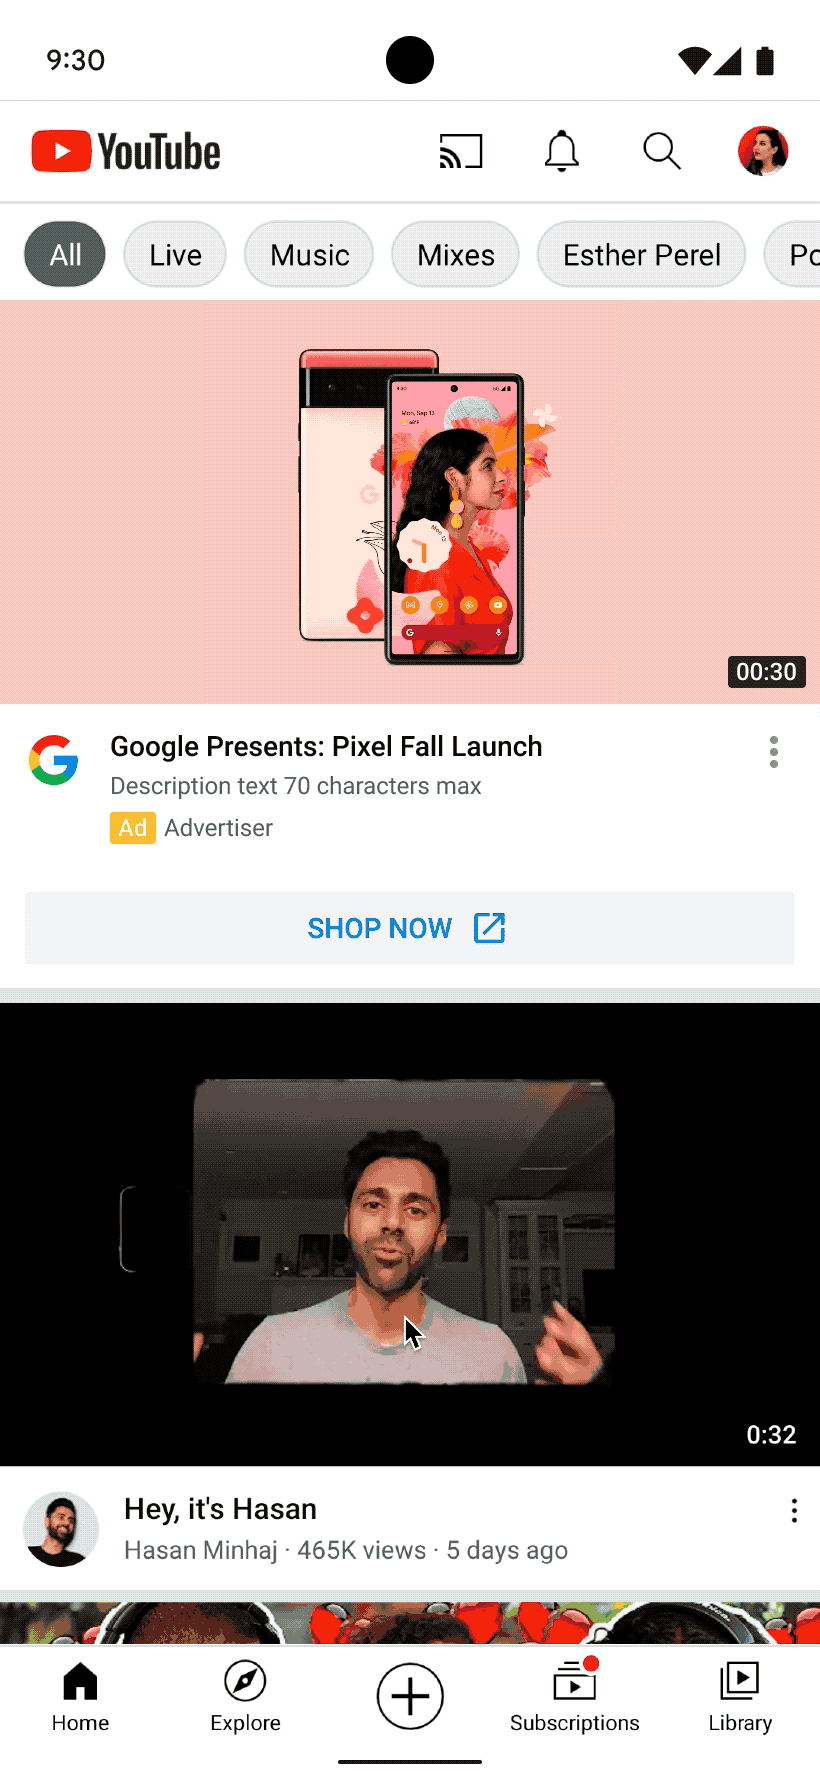 YouTube DirectResponse Ad experience using Partial Custom Tabs.